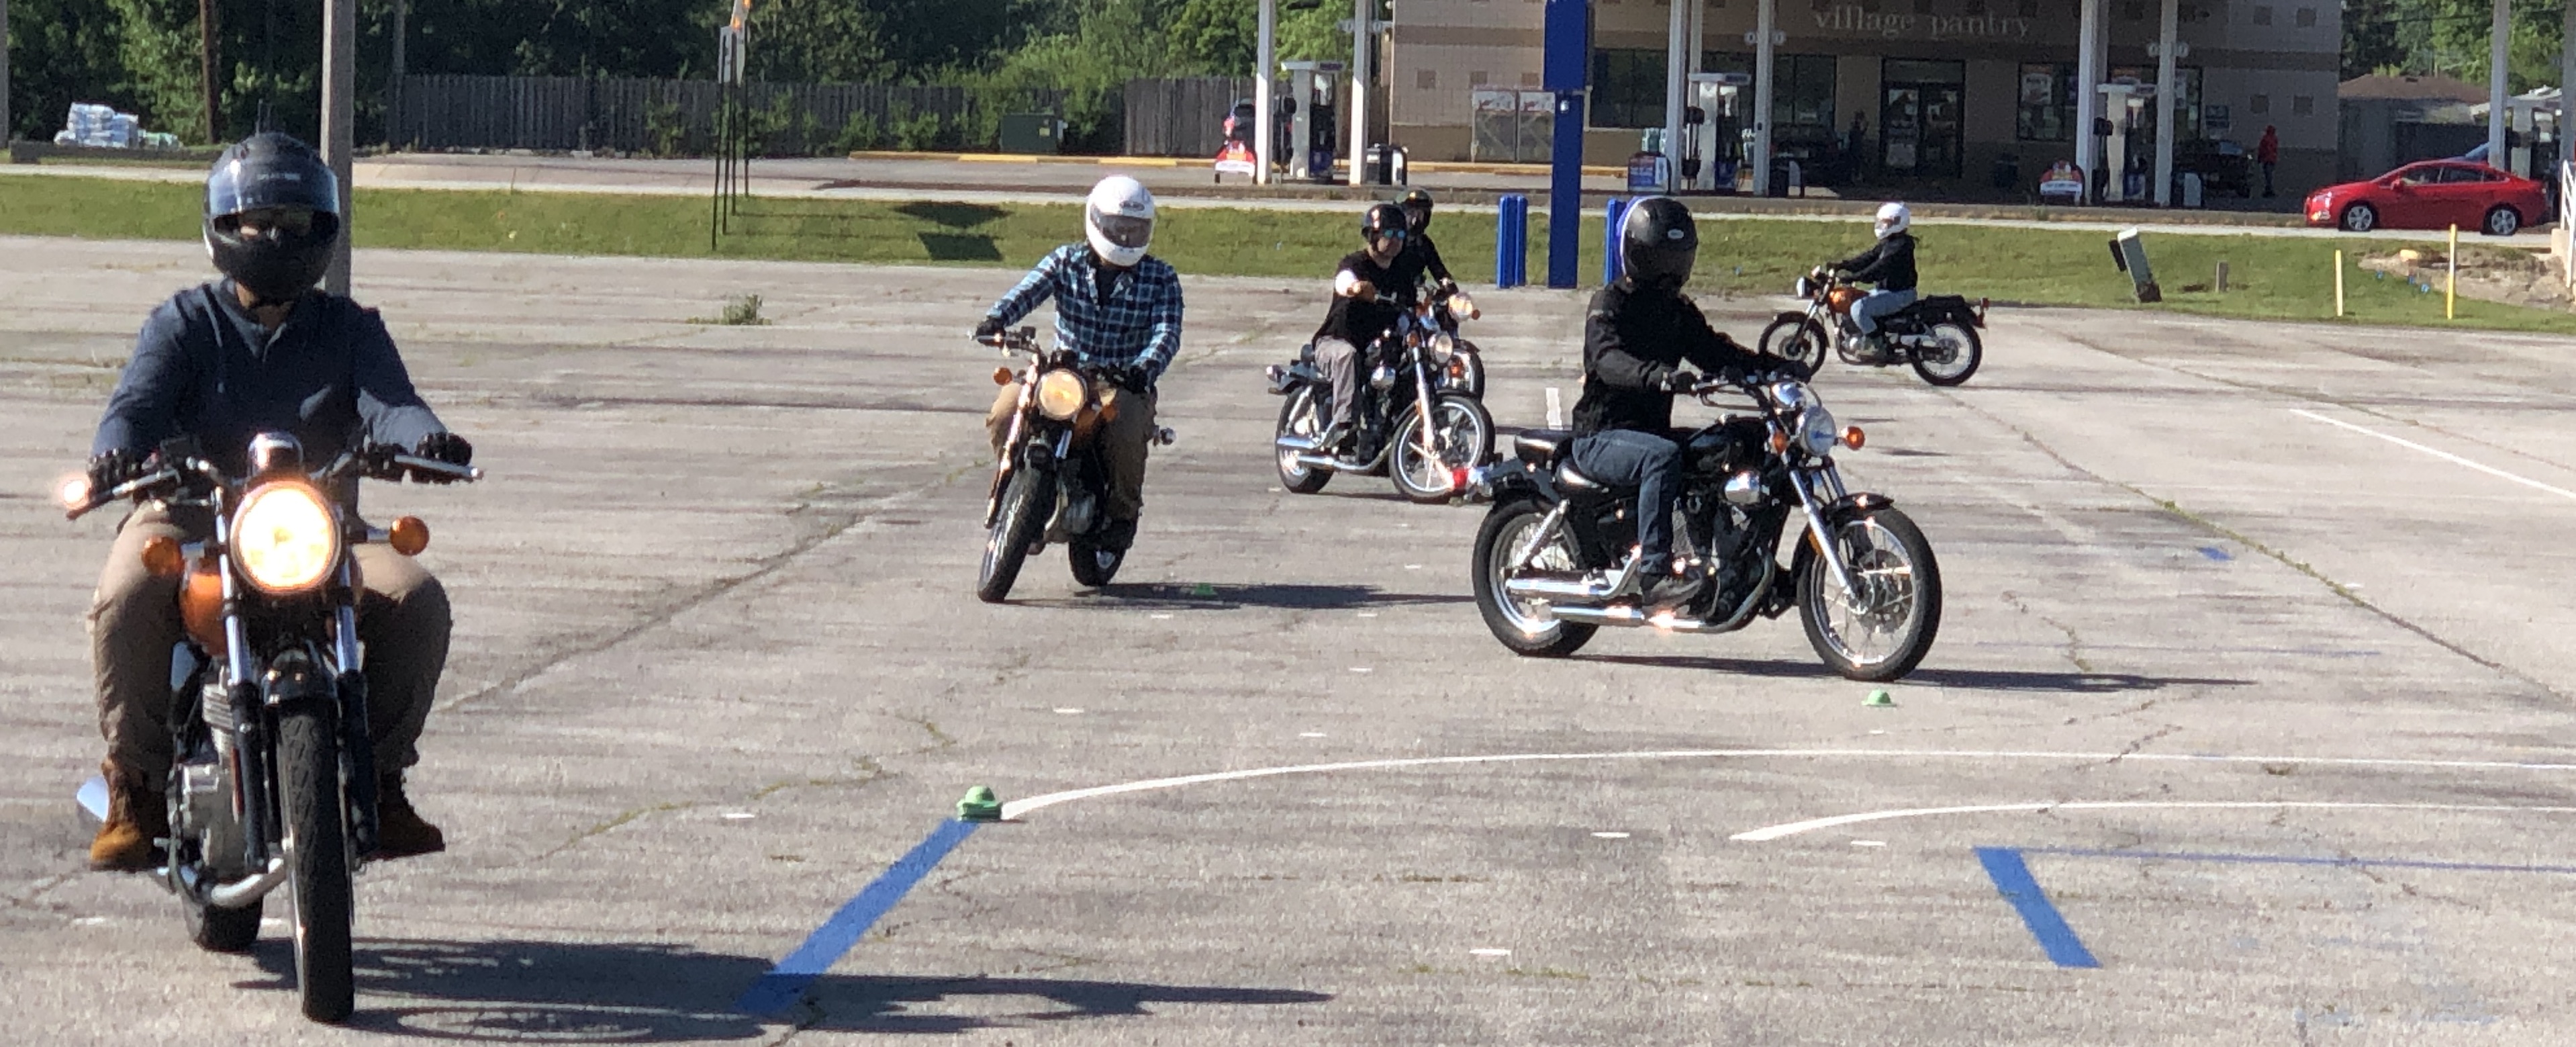 six motorcyclists practicing a cone weaver exercise on a closed range